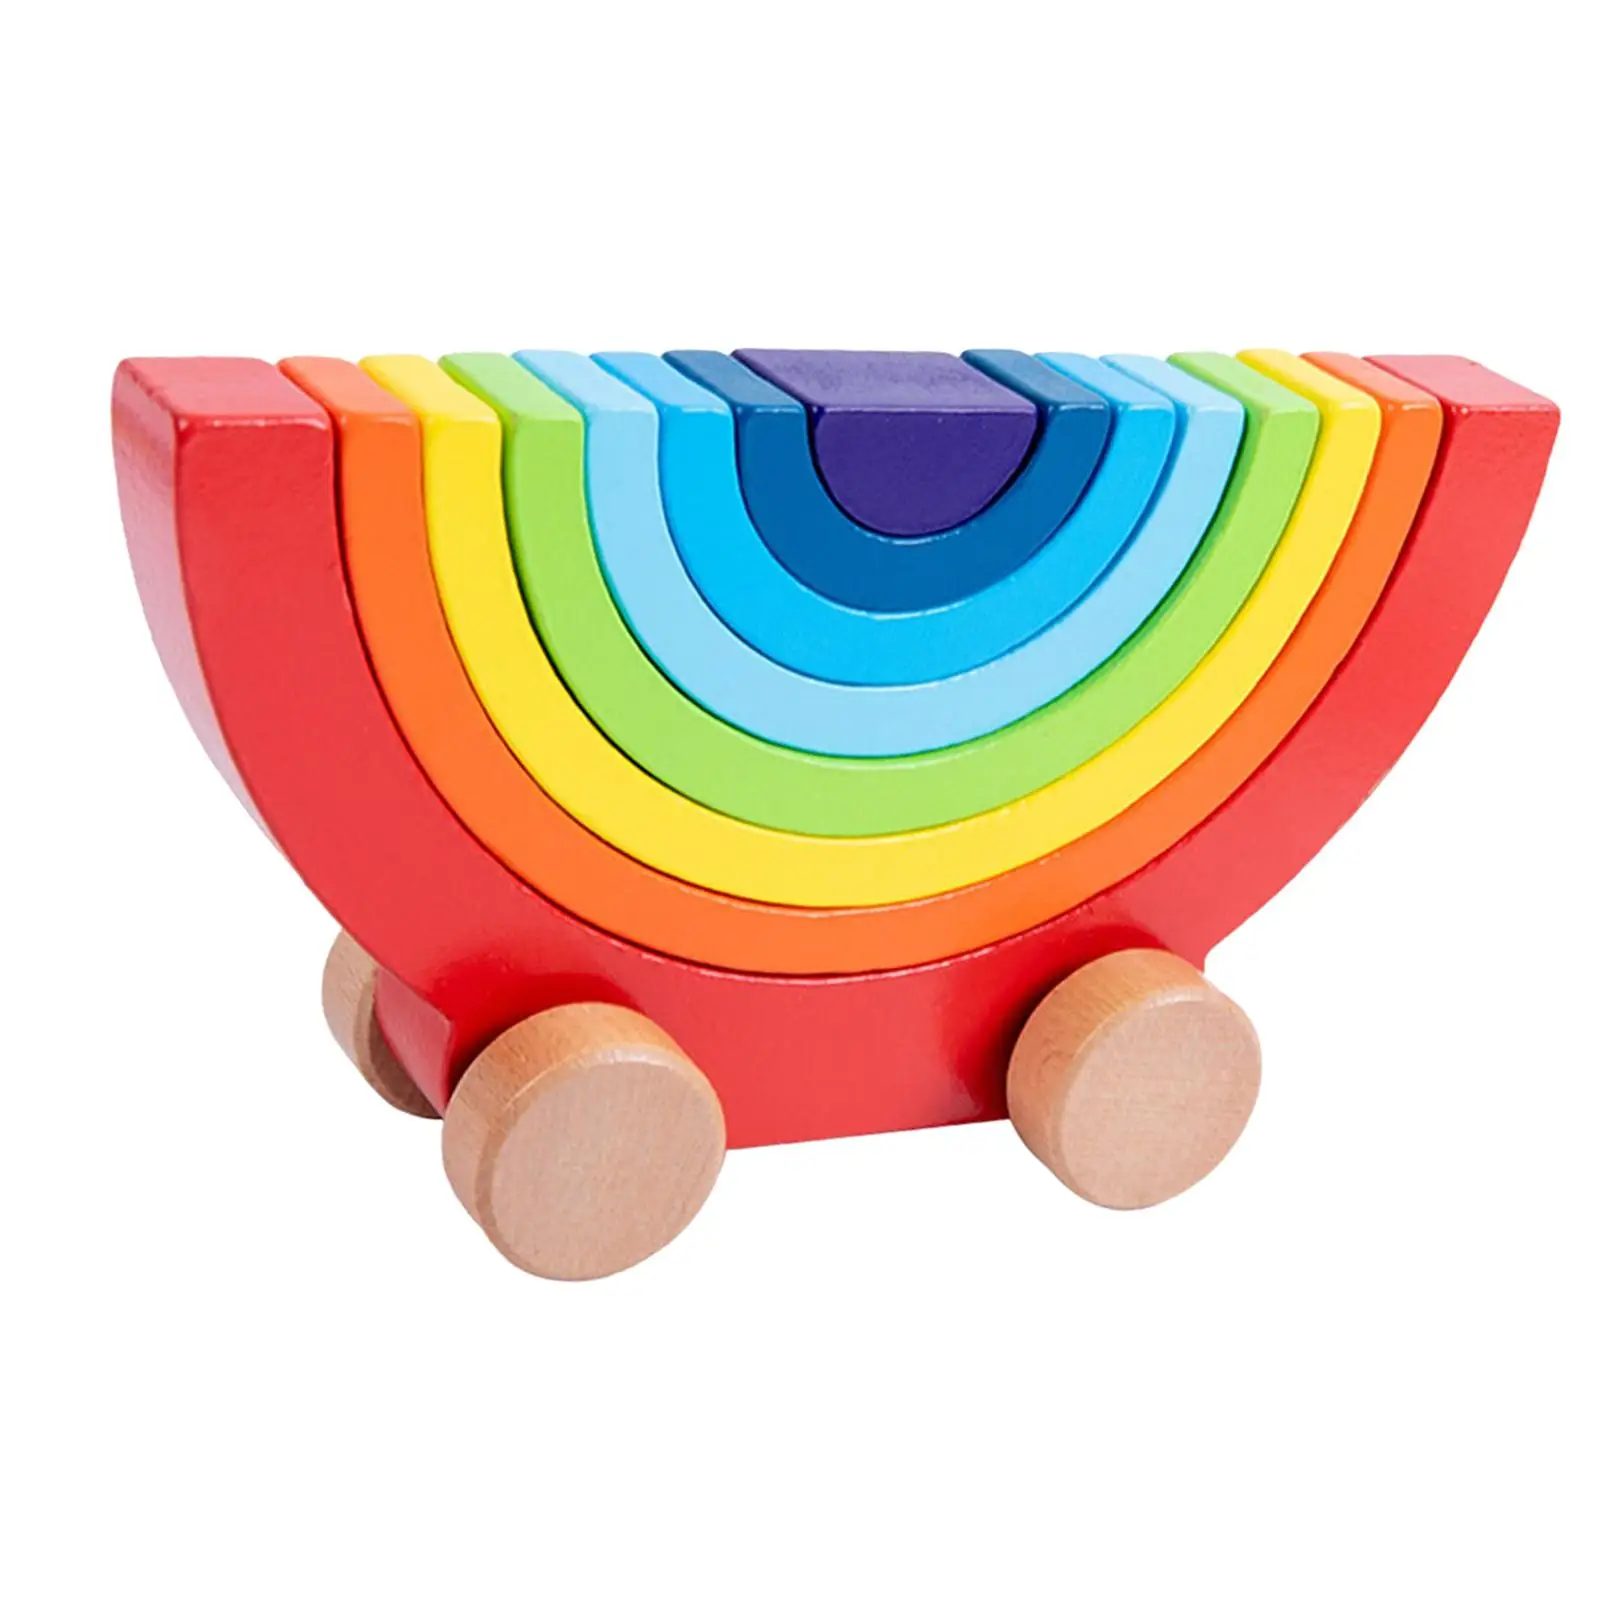 Wooden Building Blocks Car Toy Stackable Creative Stacker for Baby Teaching